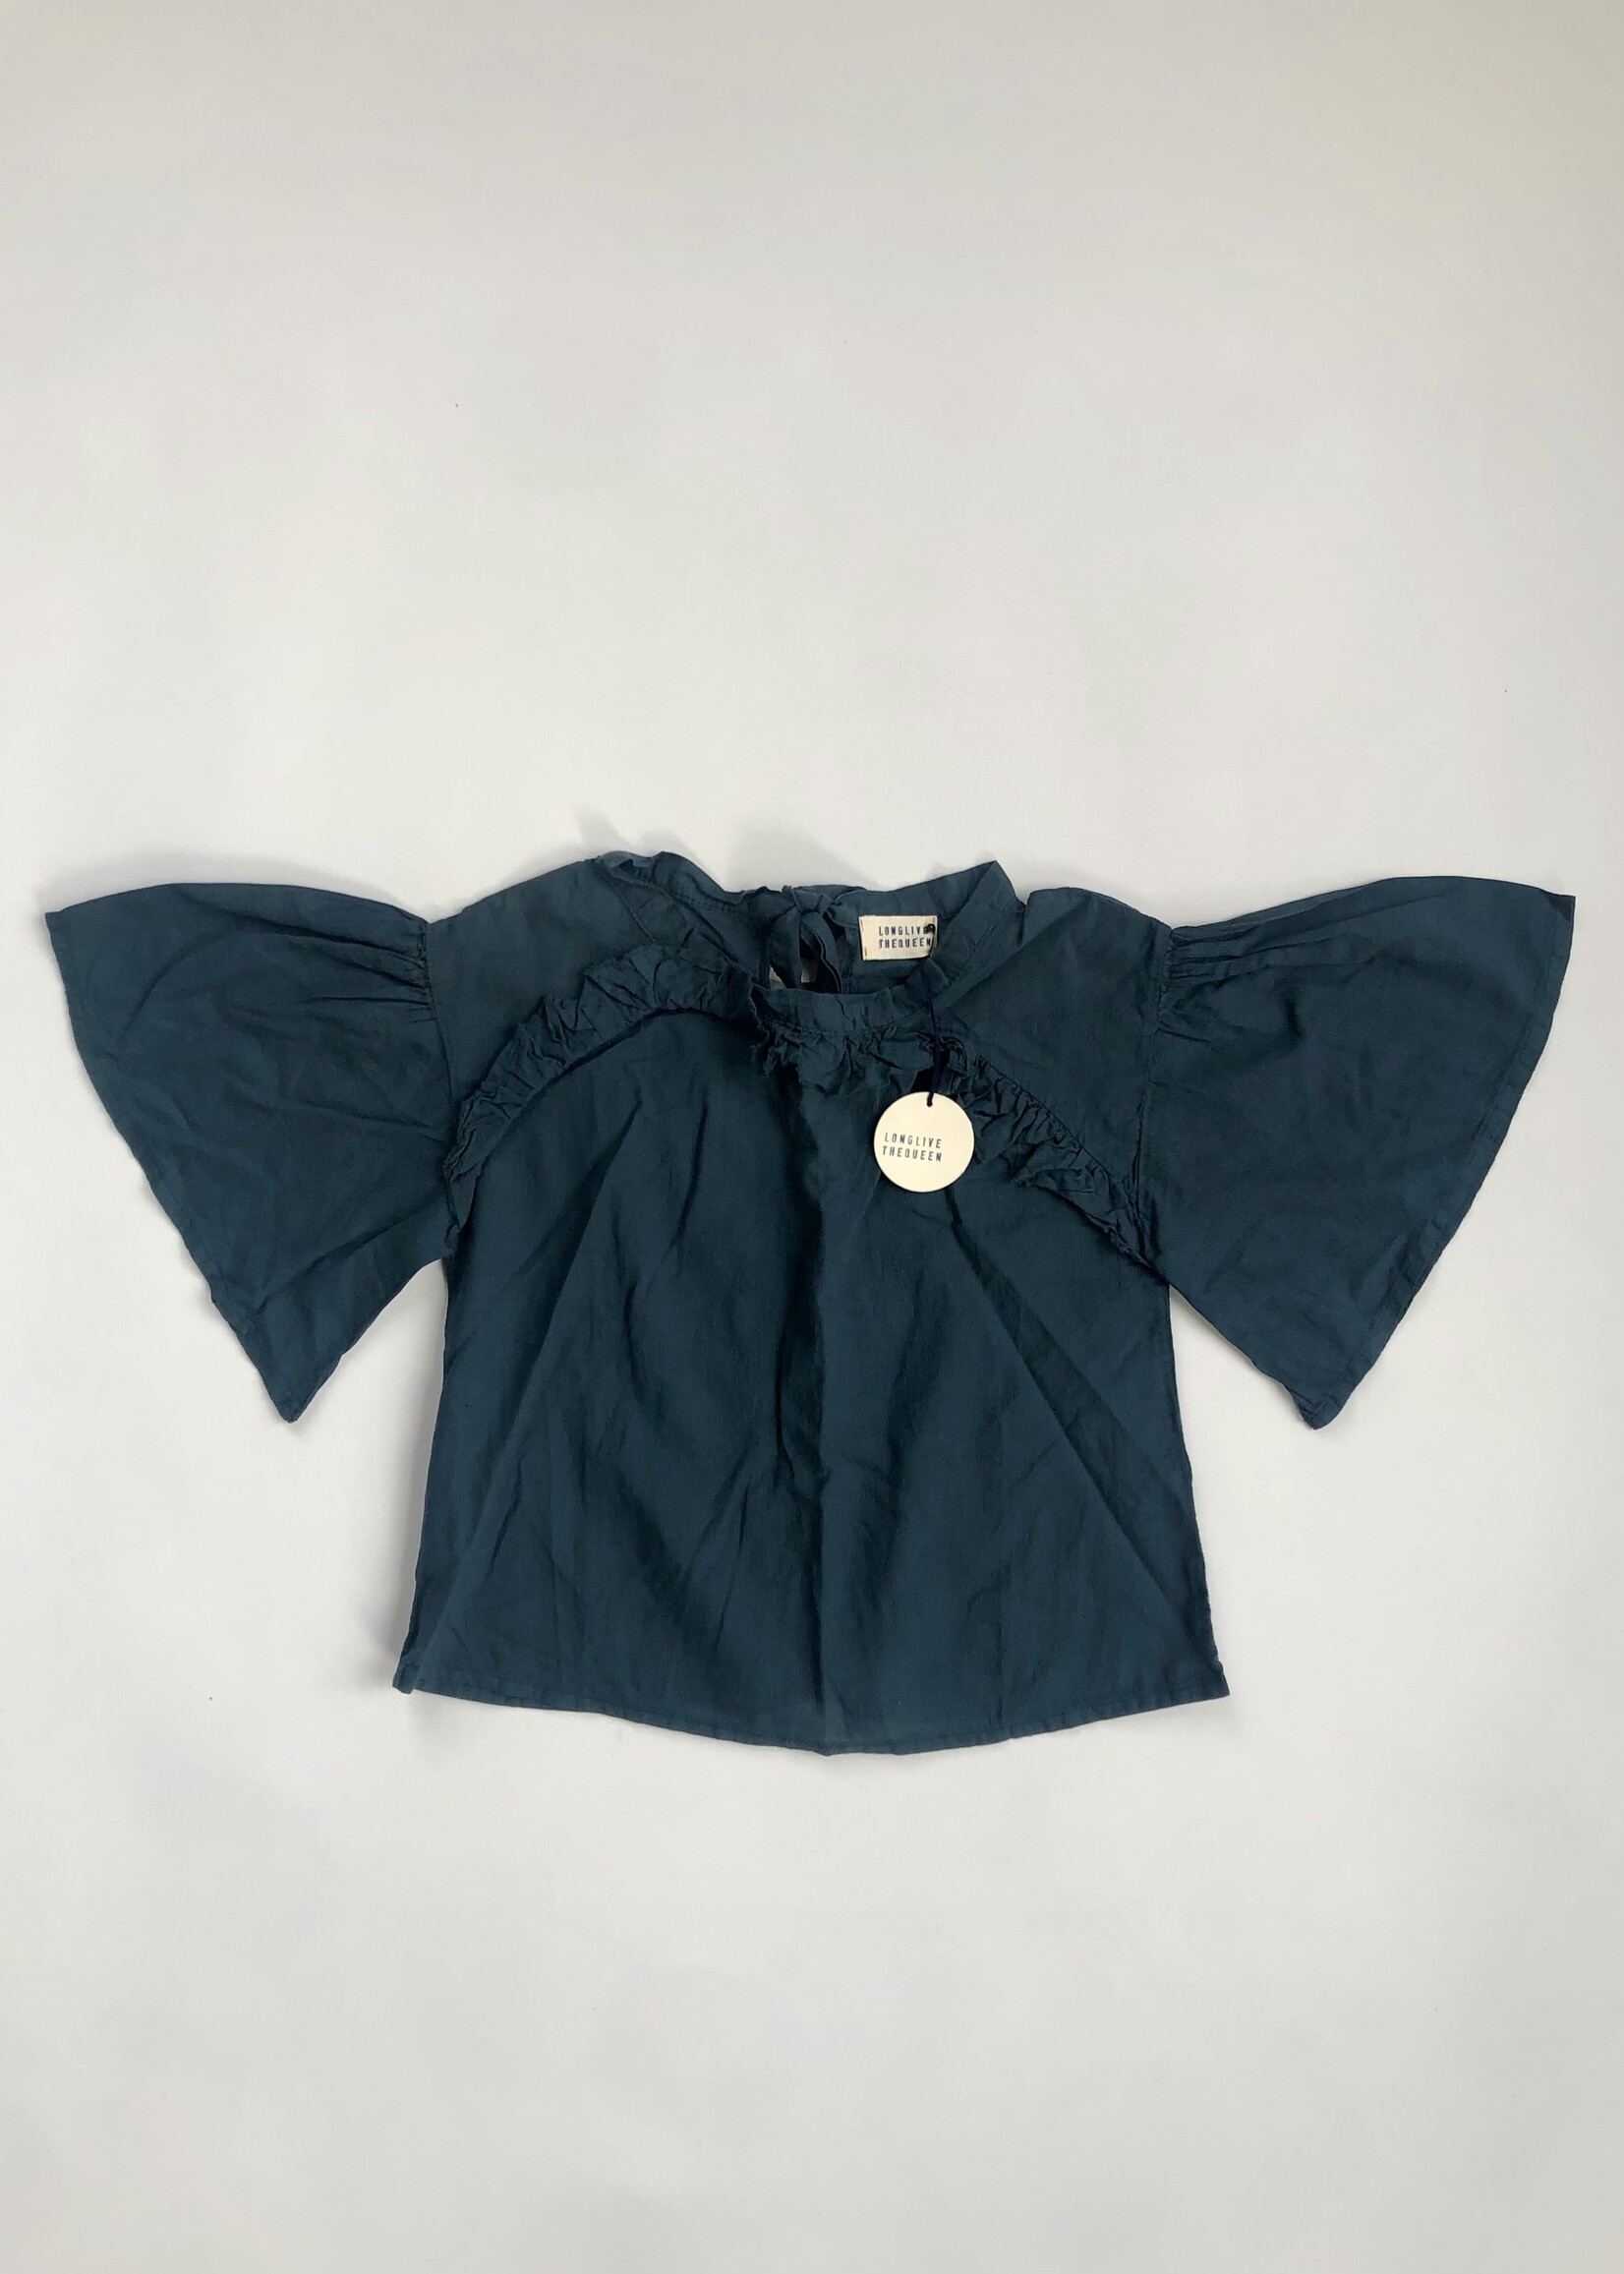 Long Live The Queen Blue grey Ruffle blouse 6-8y